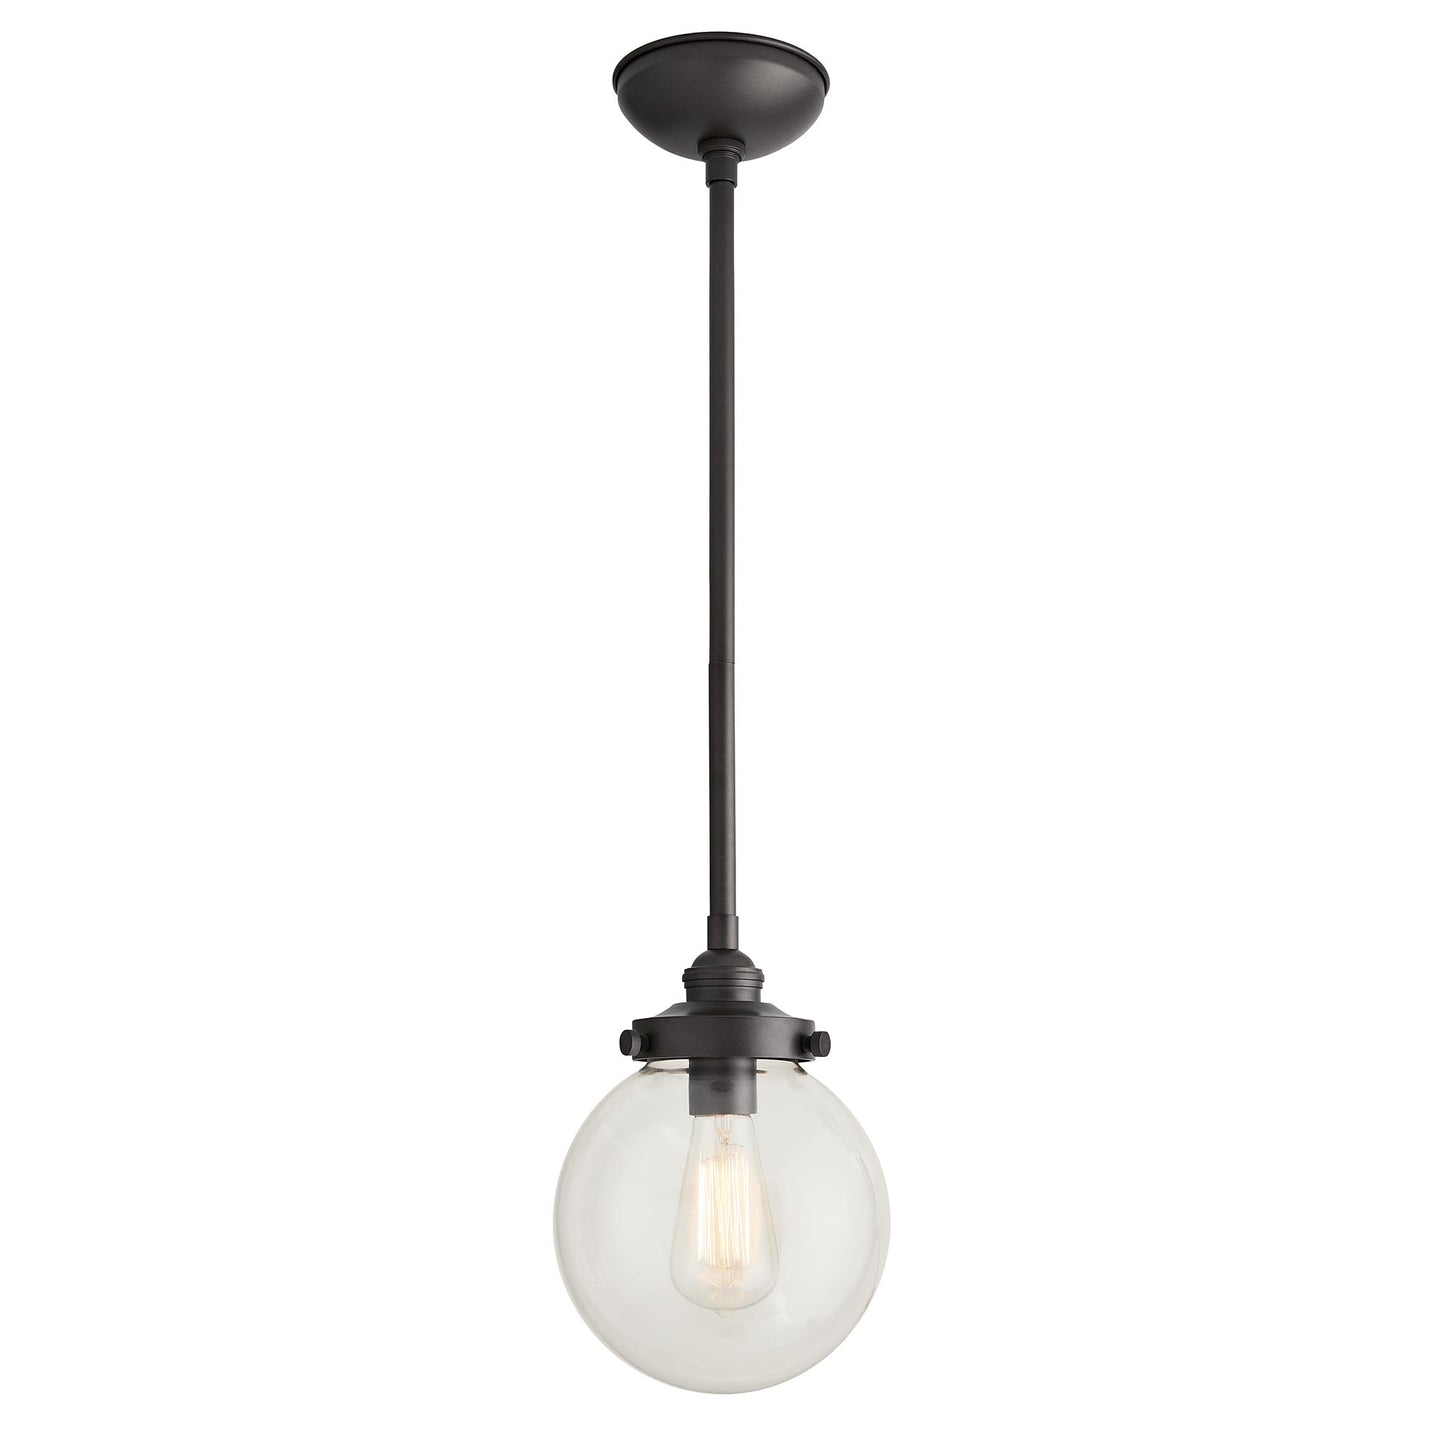 Reeves Small Outdoor Pendant - Contemporary Hanging Light Fixture for Outdoor Spaces